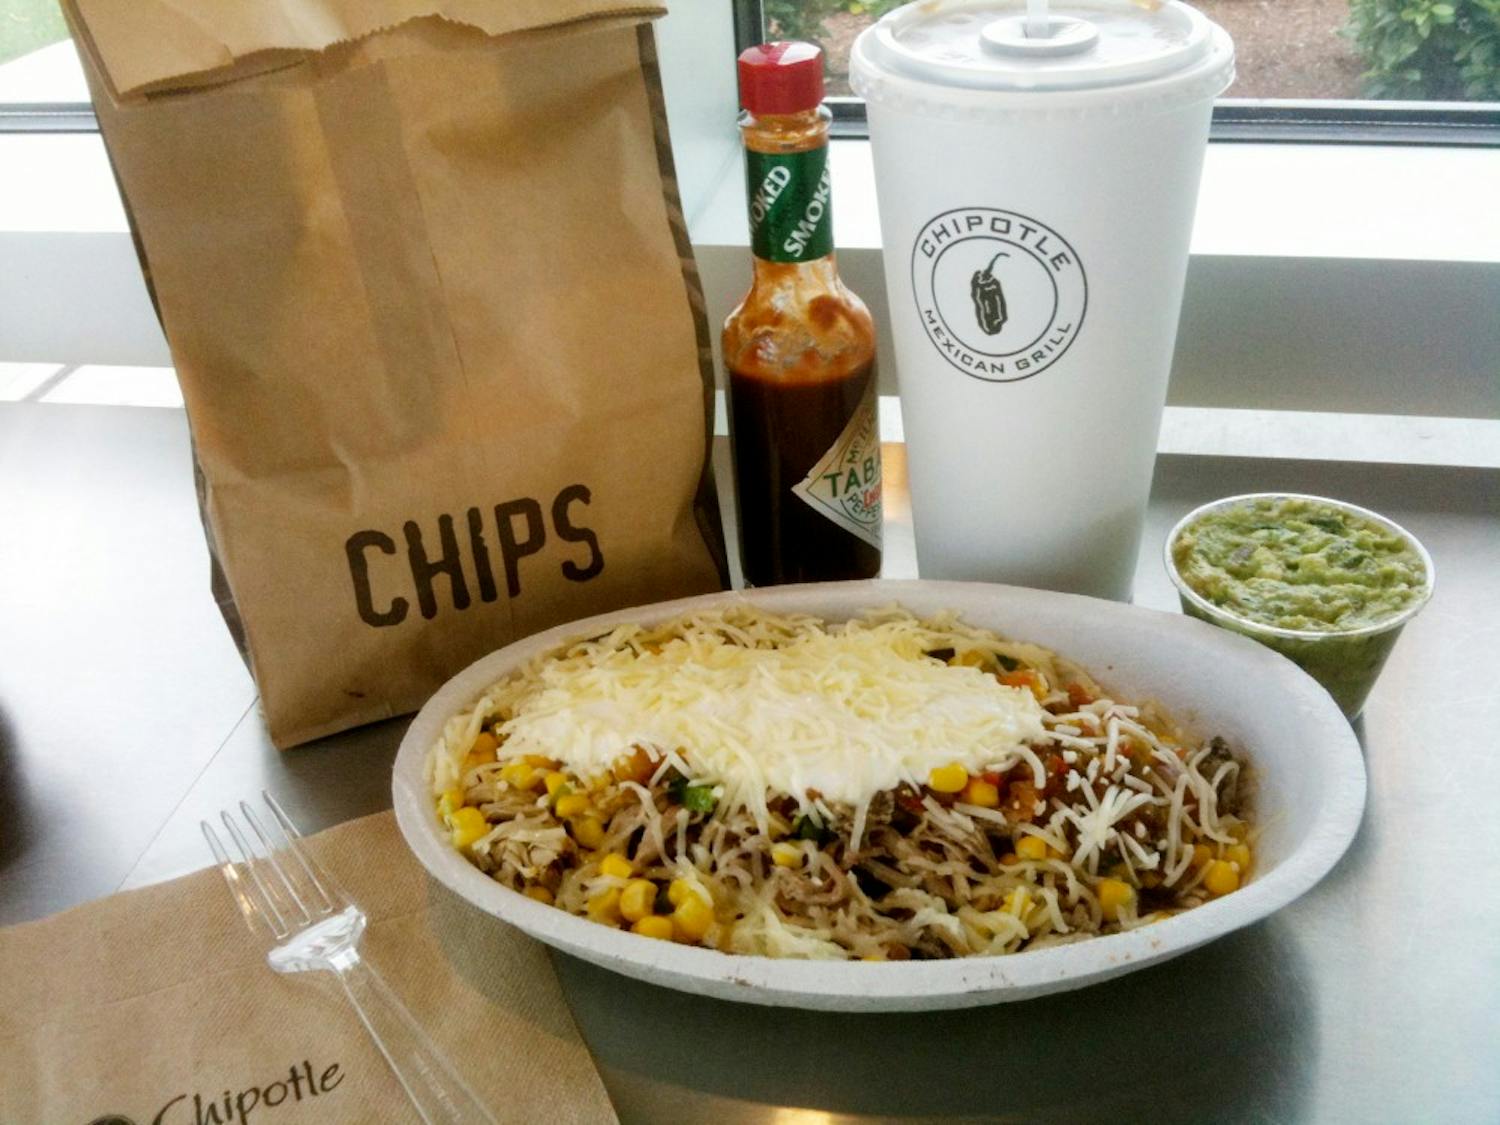 Chipotle’s e-coli breakout over the last few months has been widely publicized. The bacterial scare has heavily impacted Chipotle’s day-to-day operation, from both a business and consumer standpoint.